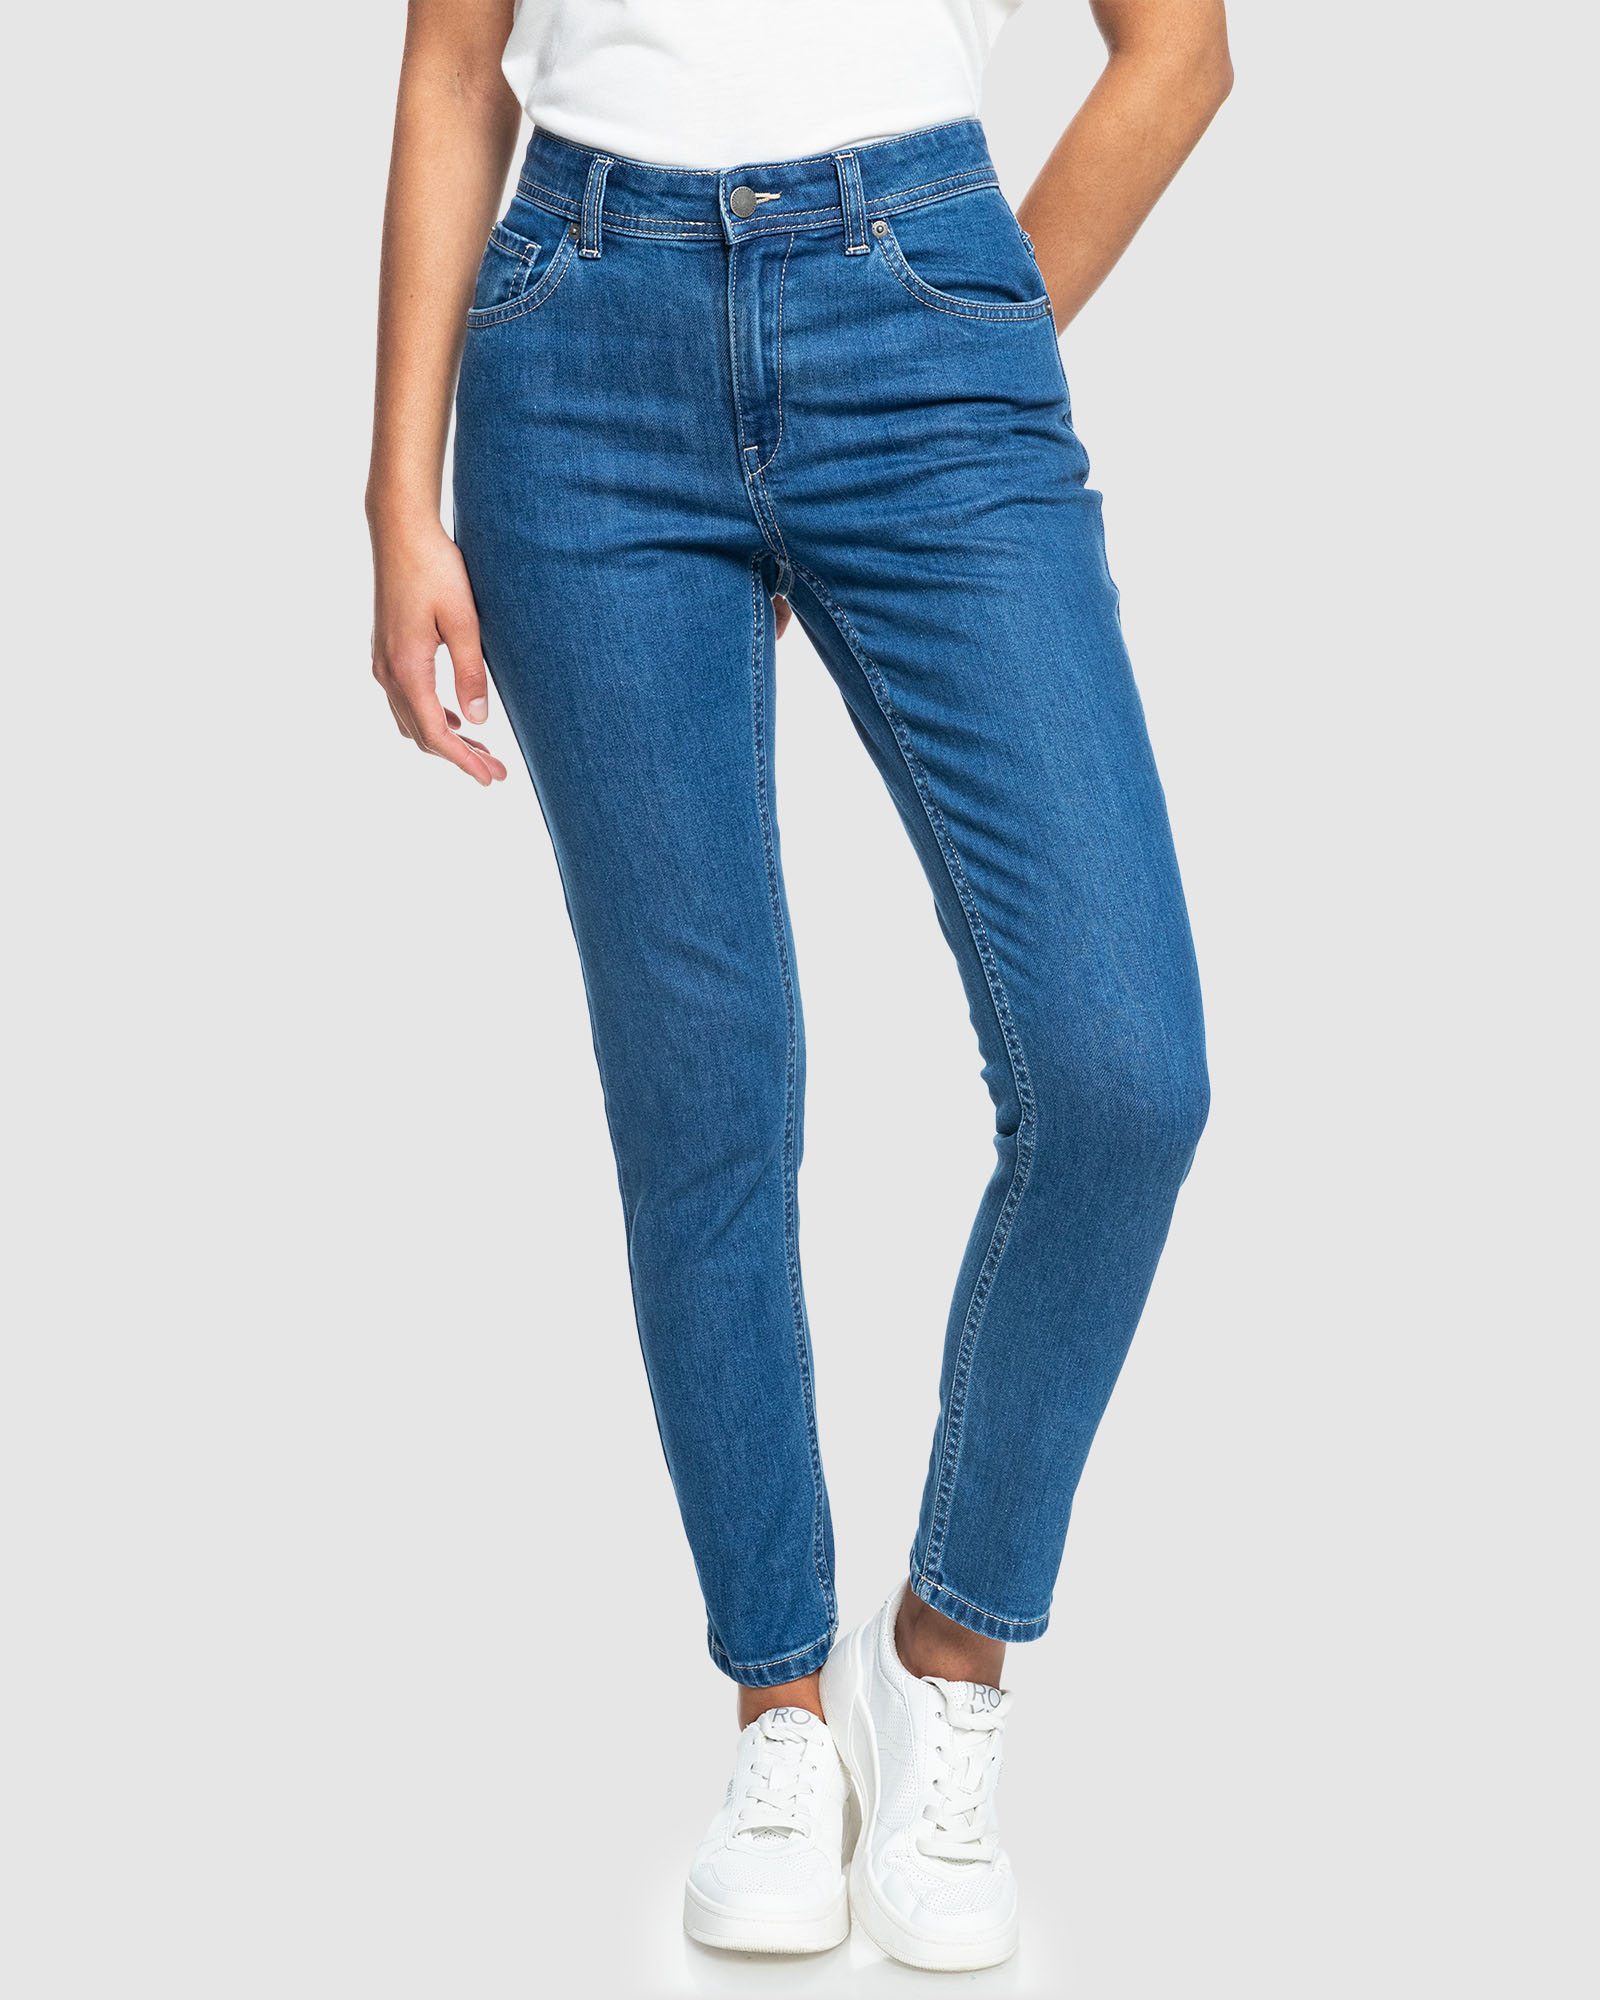 Shop Roxy Sale Womens Night Away Slim Jeans at the official roxysale ...